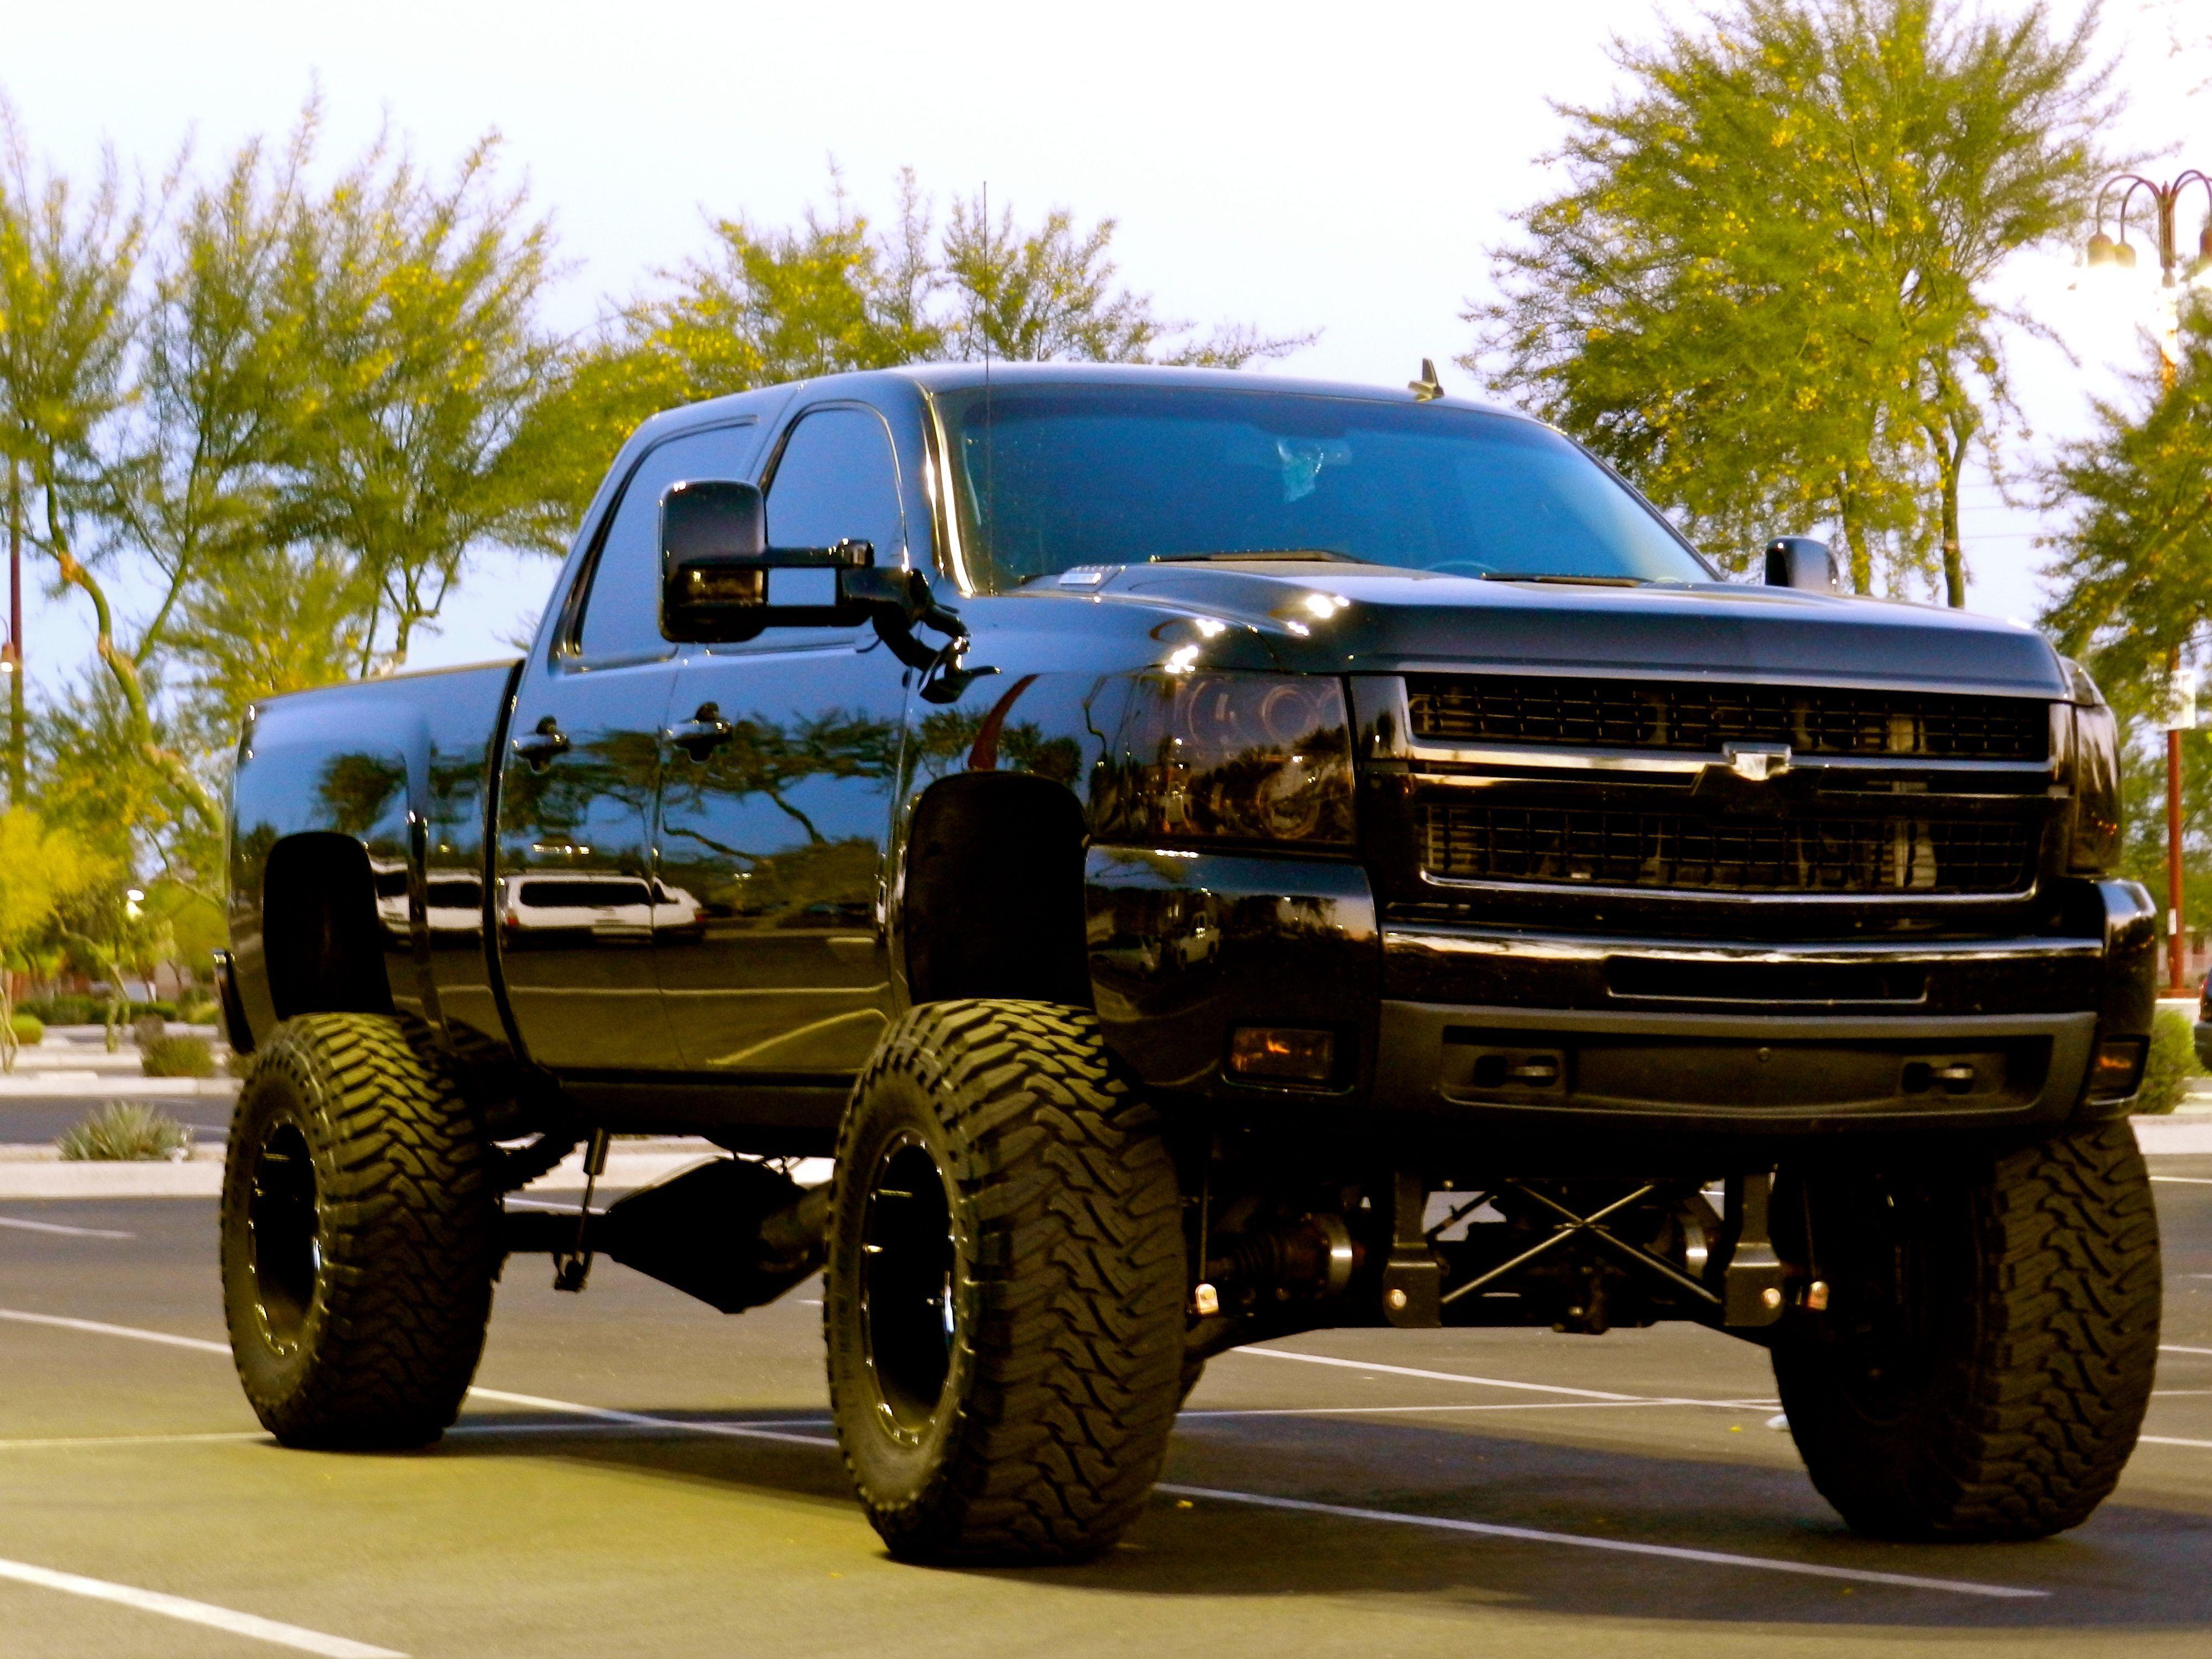 Free Download Lifted Trucks Wallpapers 4000x3000 For Your Desktop Mobile Tablet Explore 95 Chevy Trucks Wallpapers Chevy Trucks Wallpapers Chevy Trucks Wallpaper Lifted Chevy Trucks Wallpaper